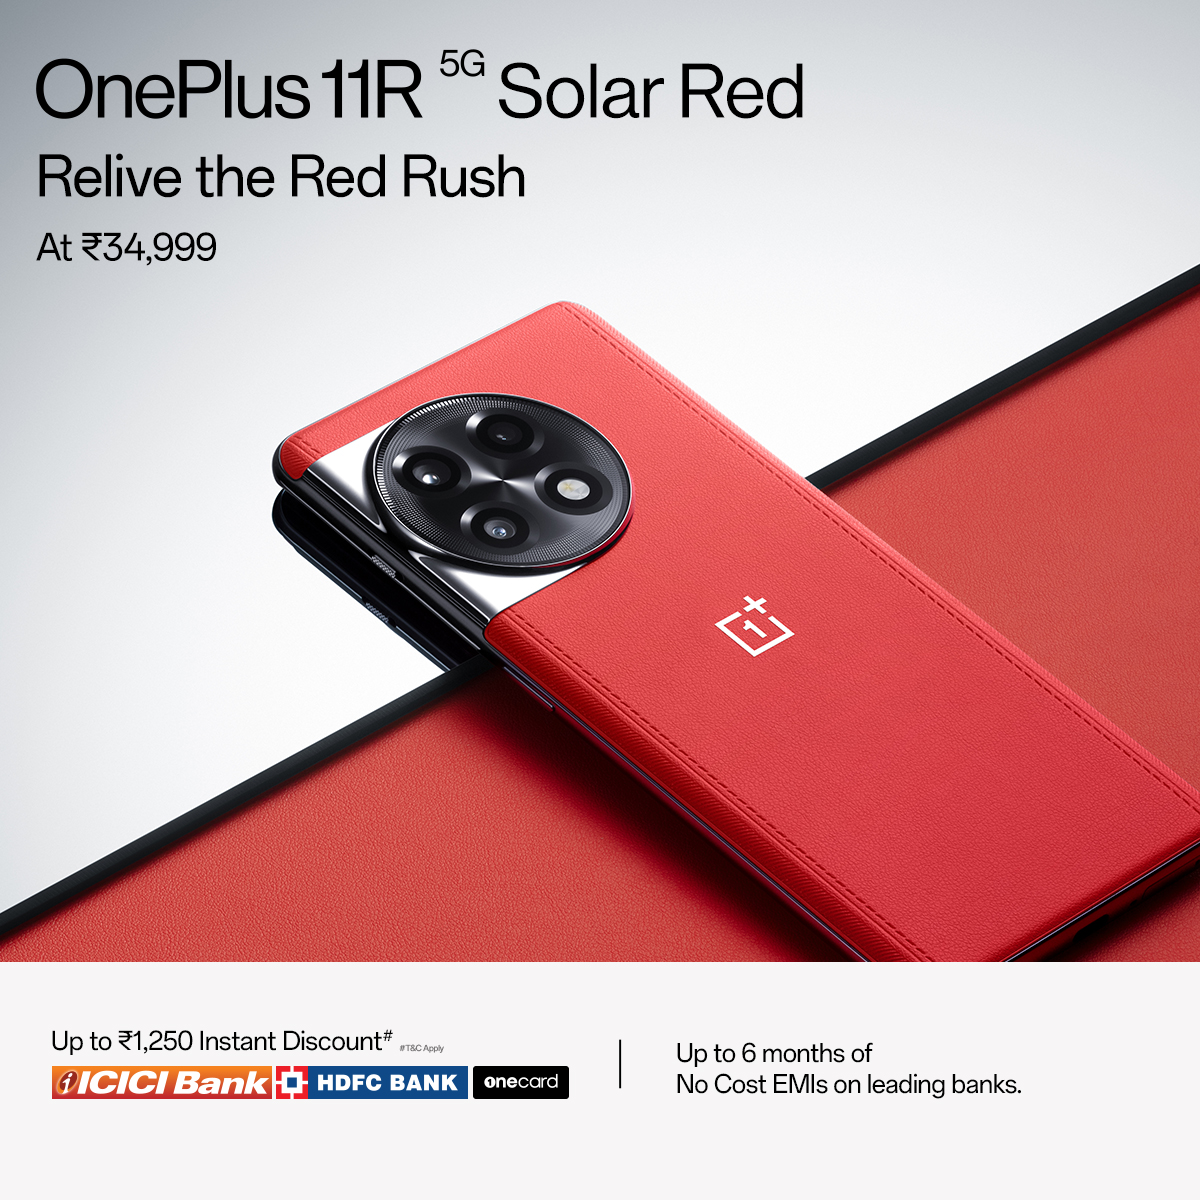 It's time to relive the red rush. Experience 8GB RAM + 128GB Storage with the #OnePlus11R Solar Red Edition. Get yours today: onepl.us/3vTRUCa